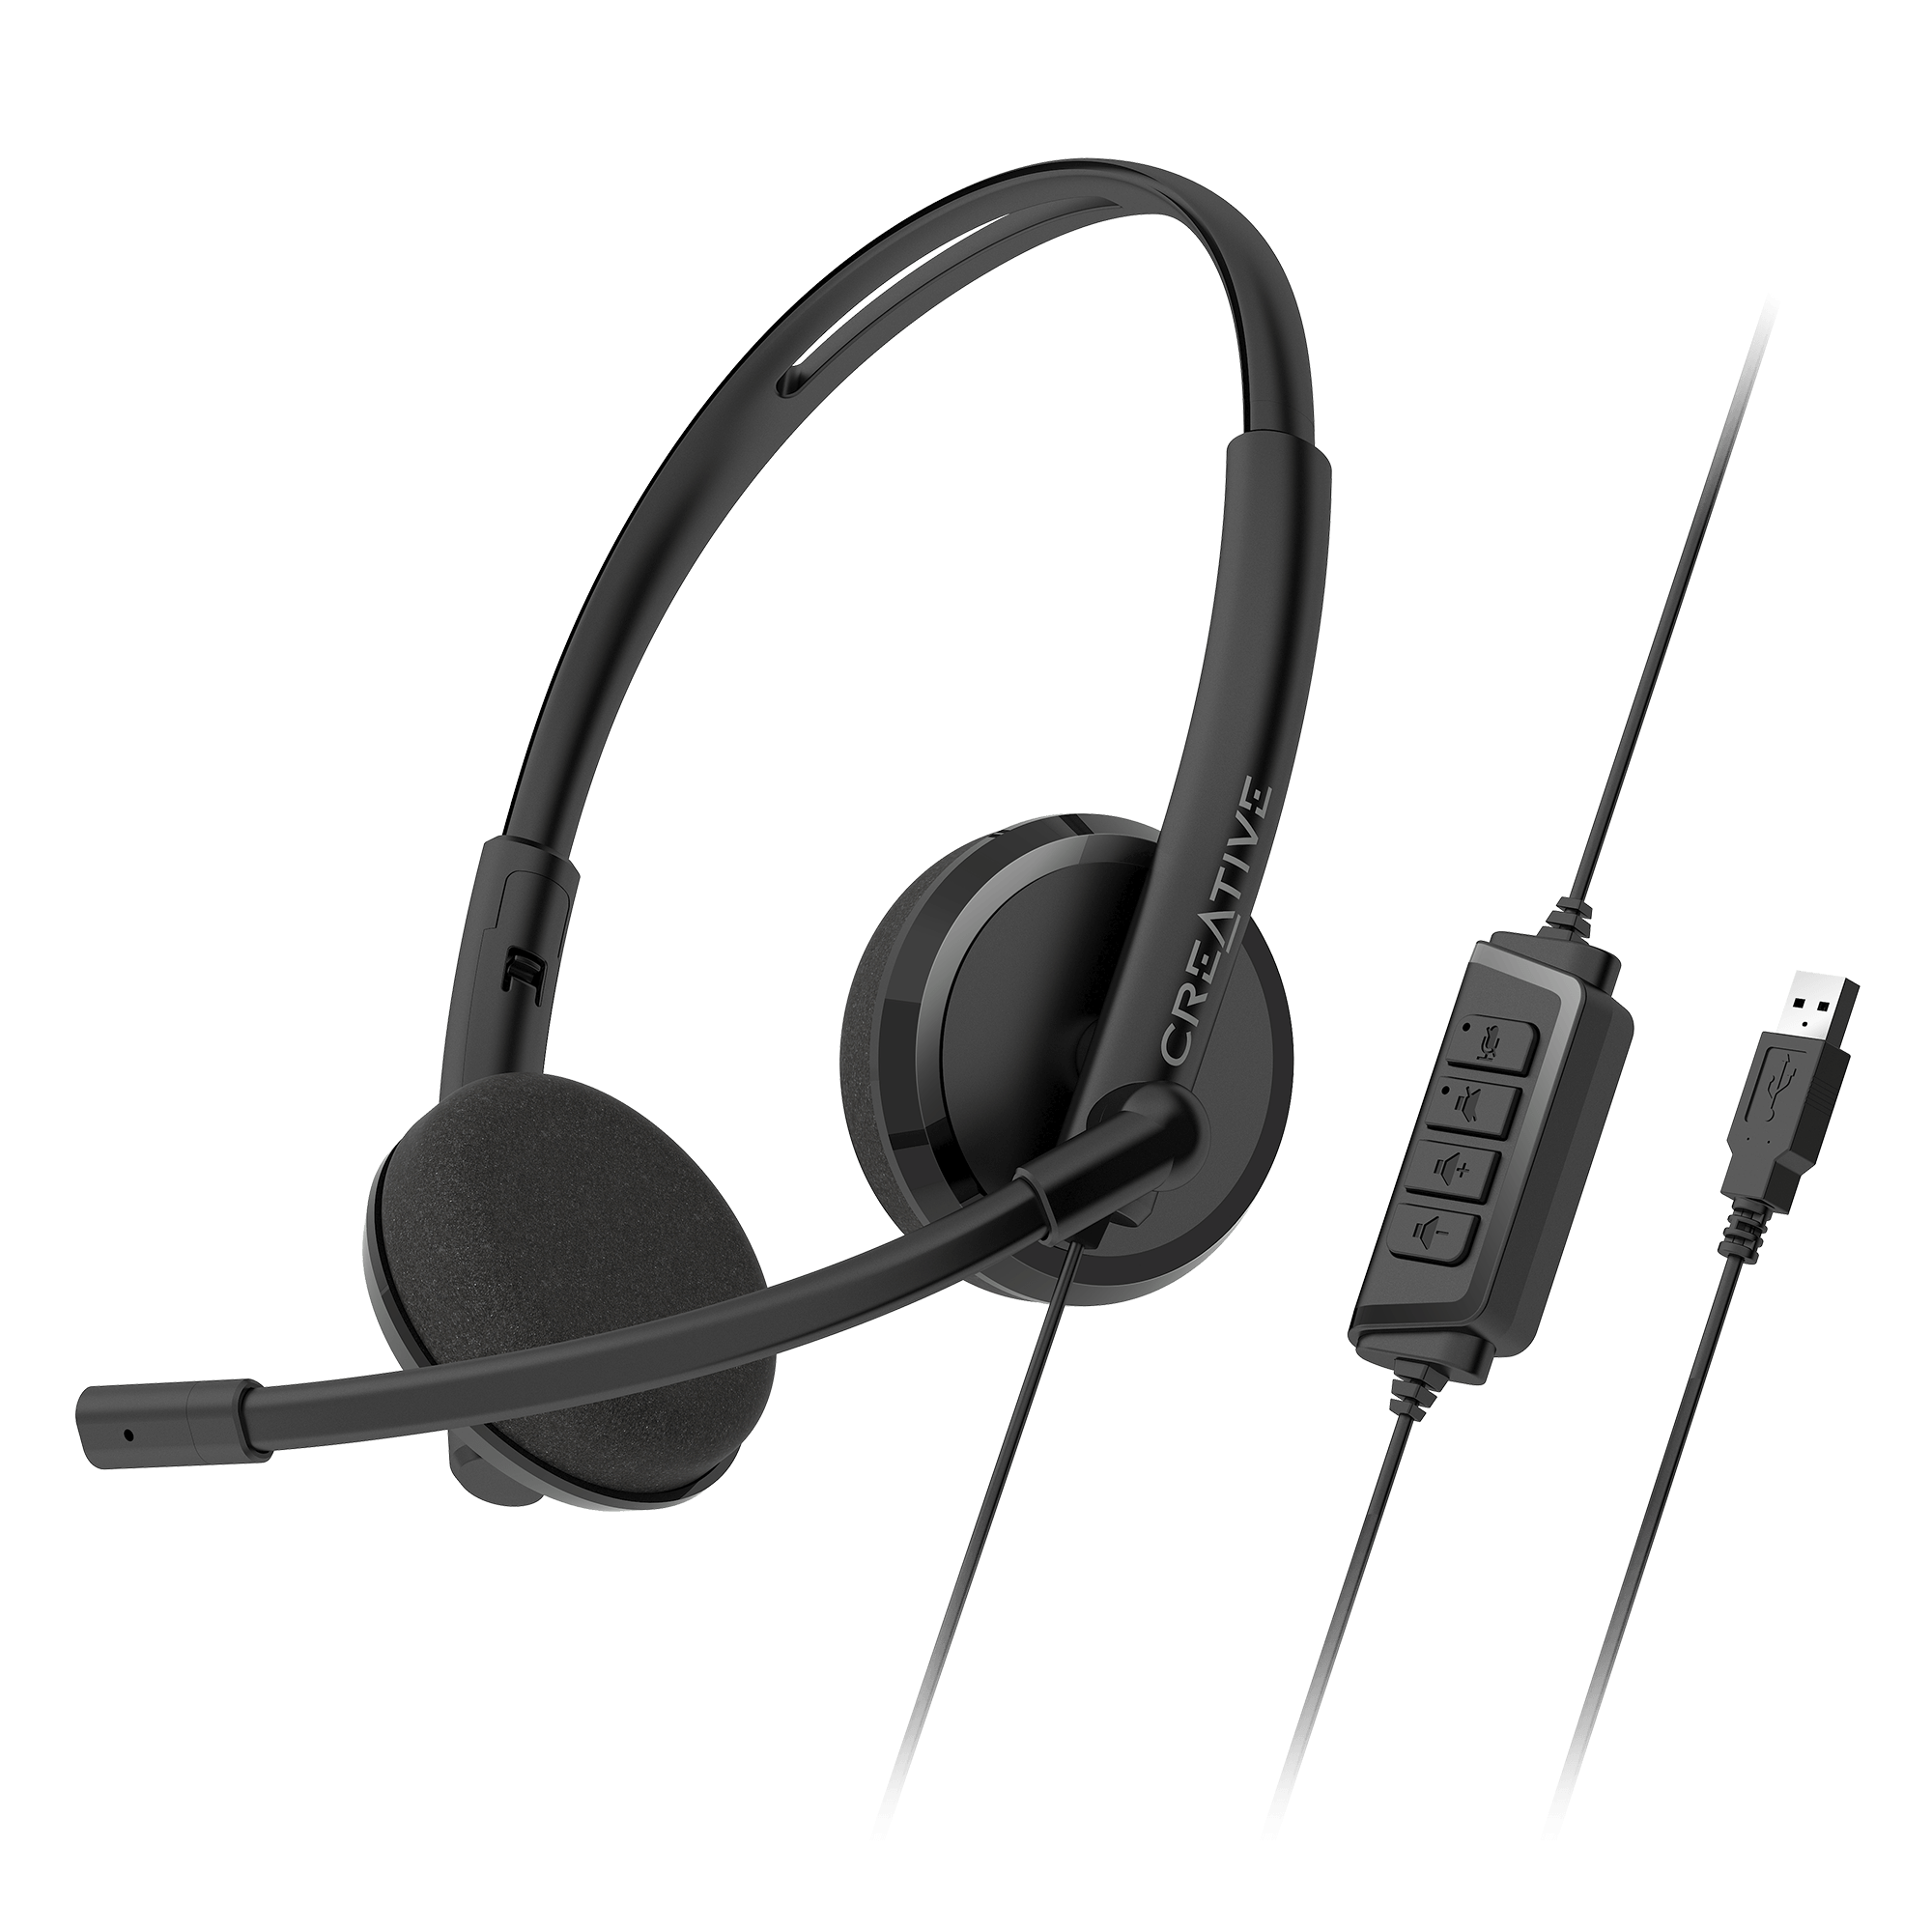 and Remote - Noise-cancelling Inline States) with Creative (United USB HS-220 Creative Mic Labs Headset